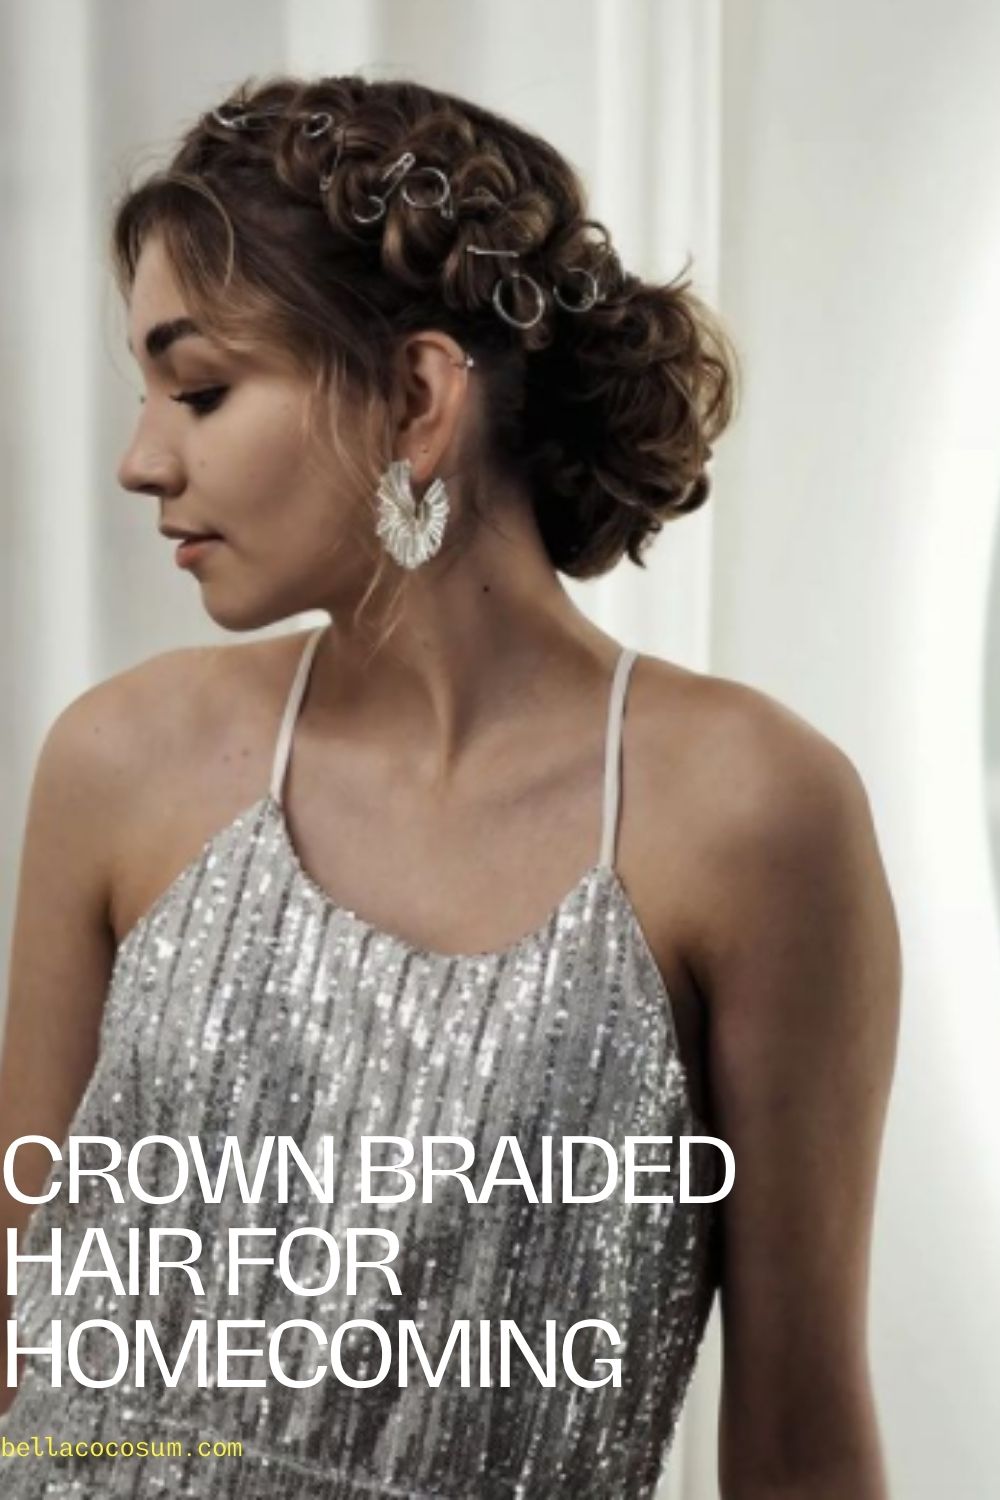 Crown braided hair for homecoming